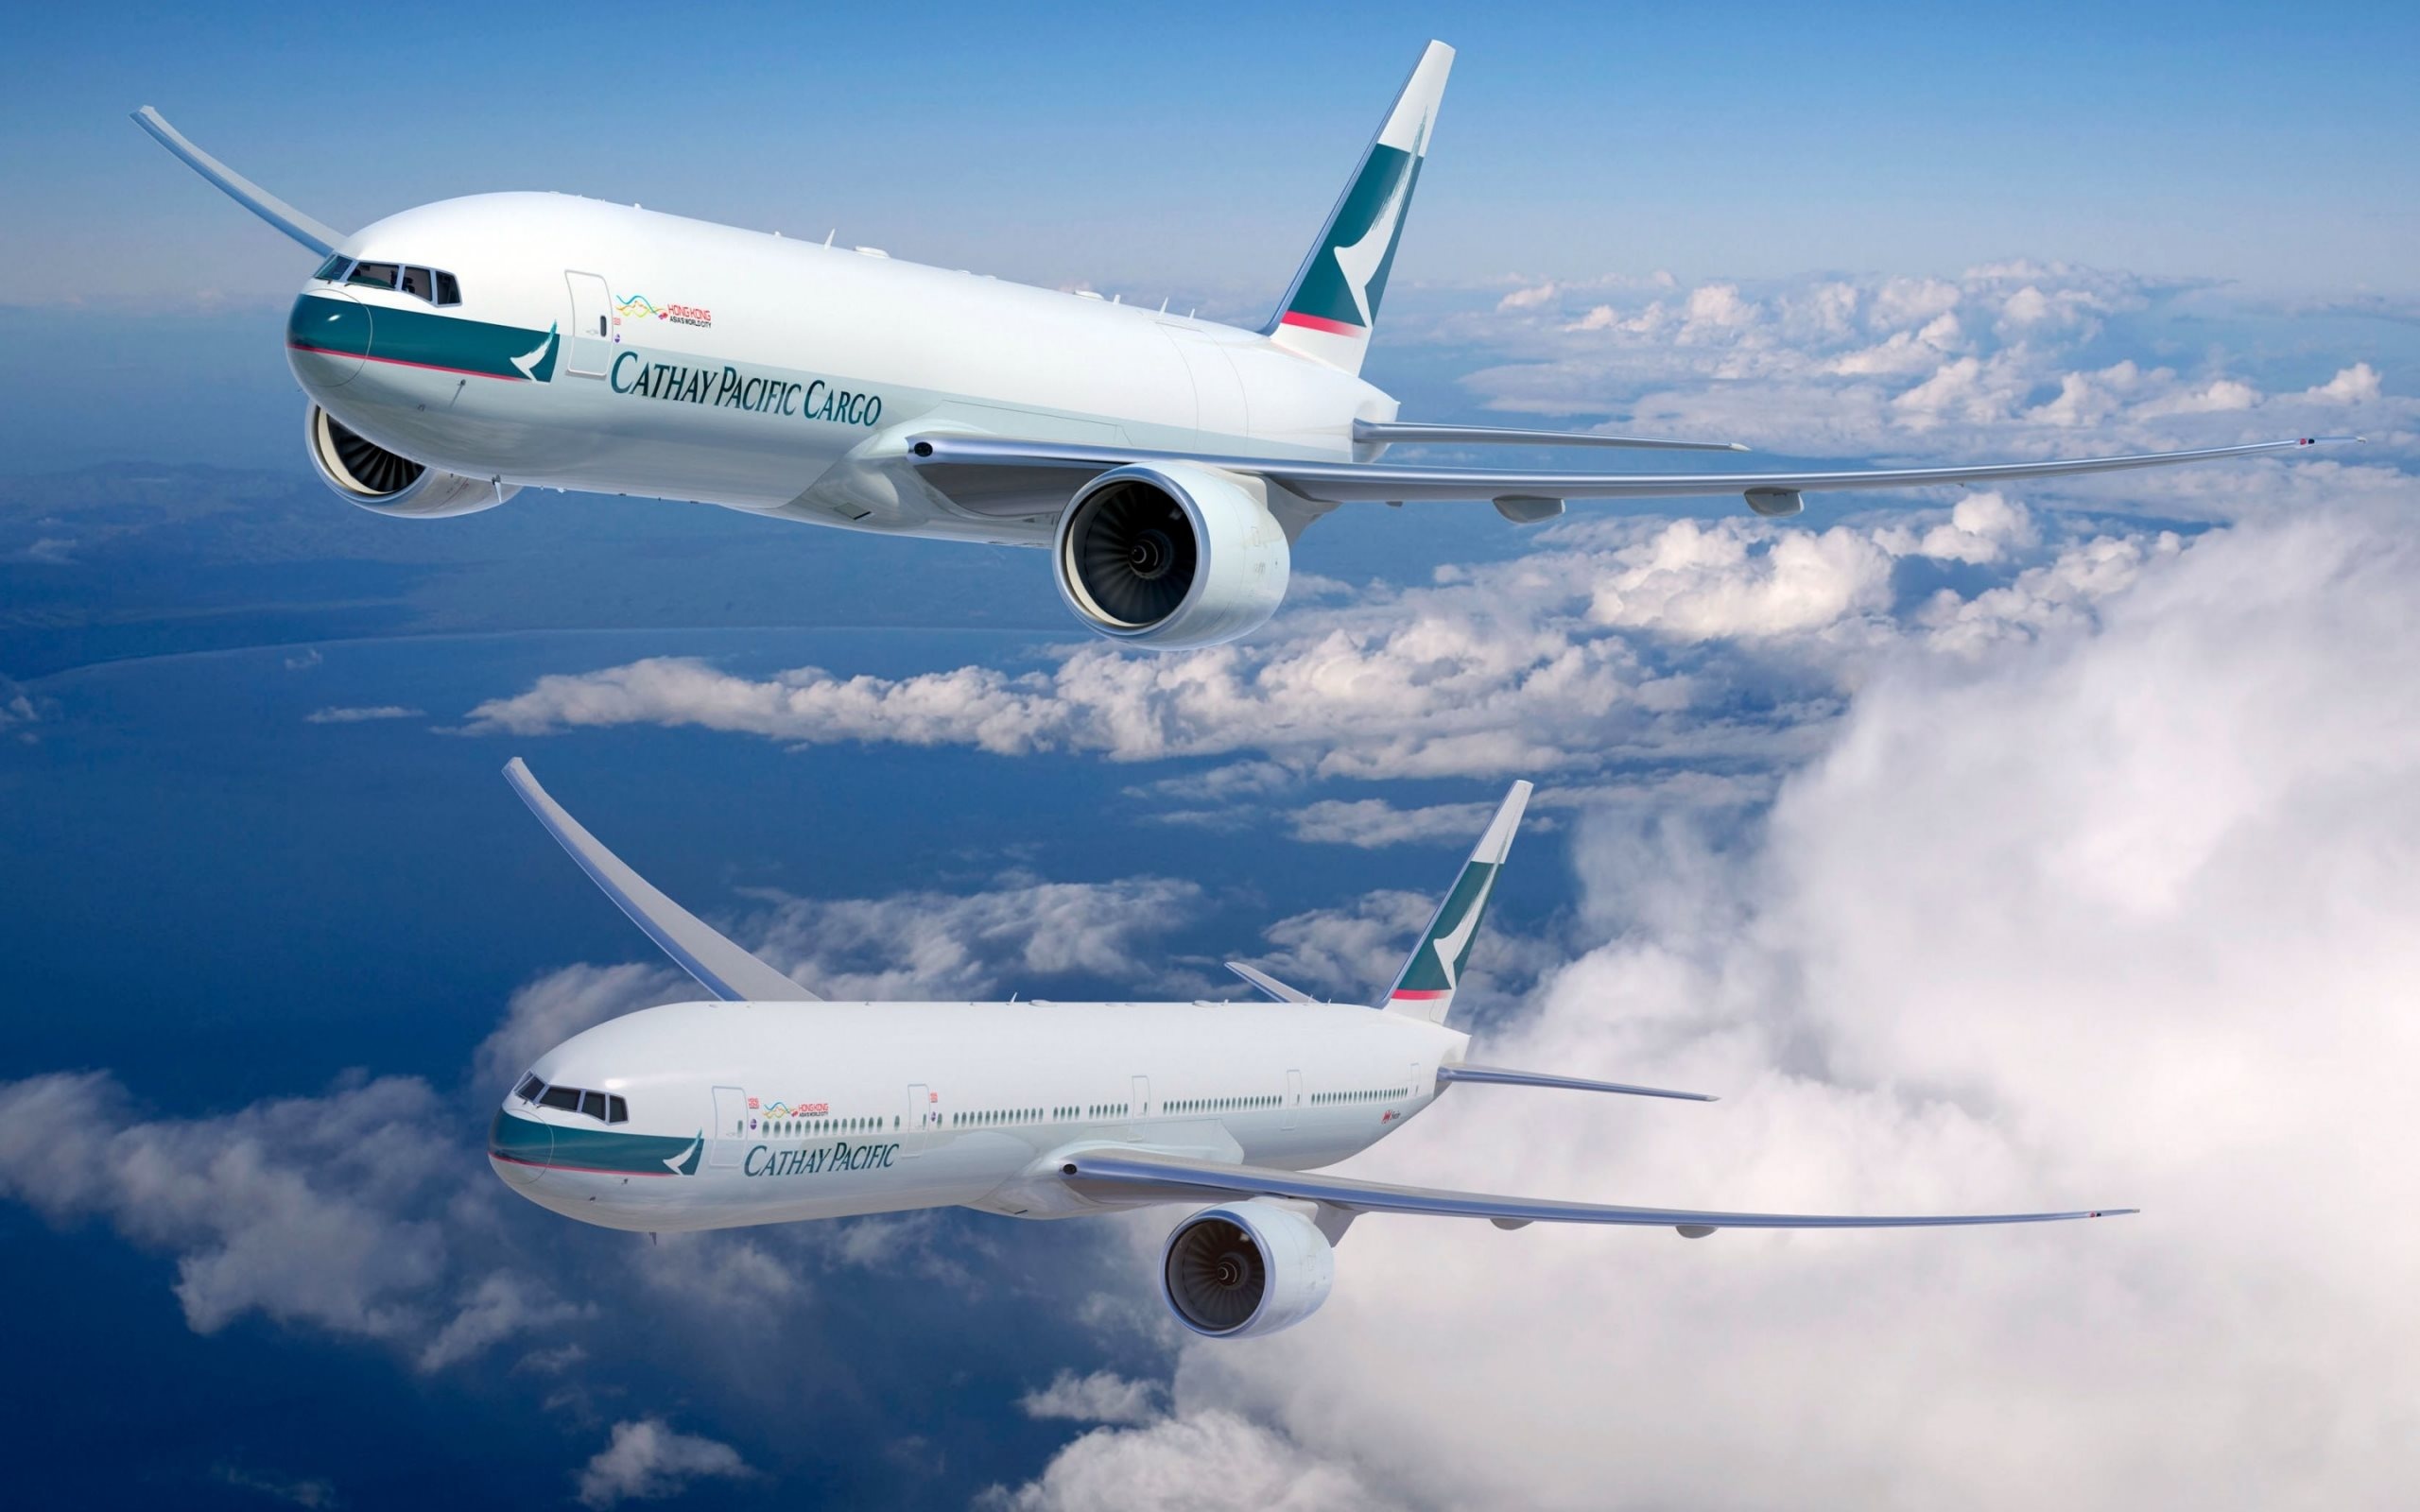 Cathay Pacific, Cathay Pacific cargo, Passenger planes, 2560x1600 HD Desktop